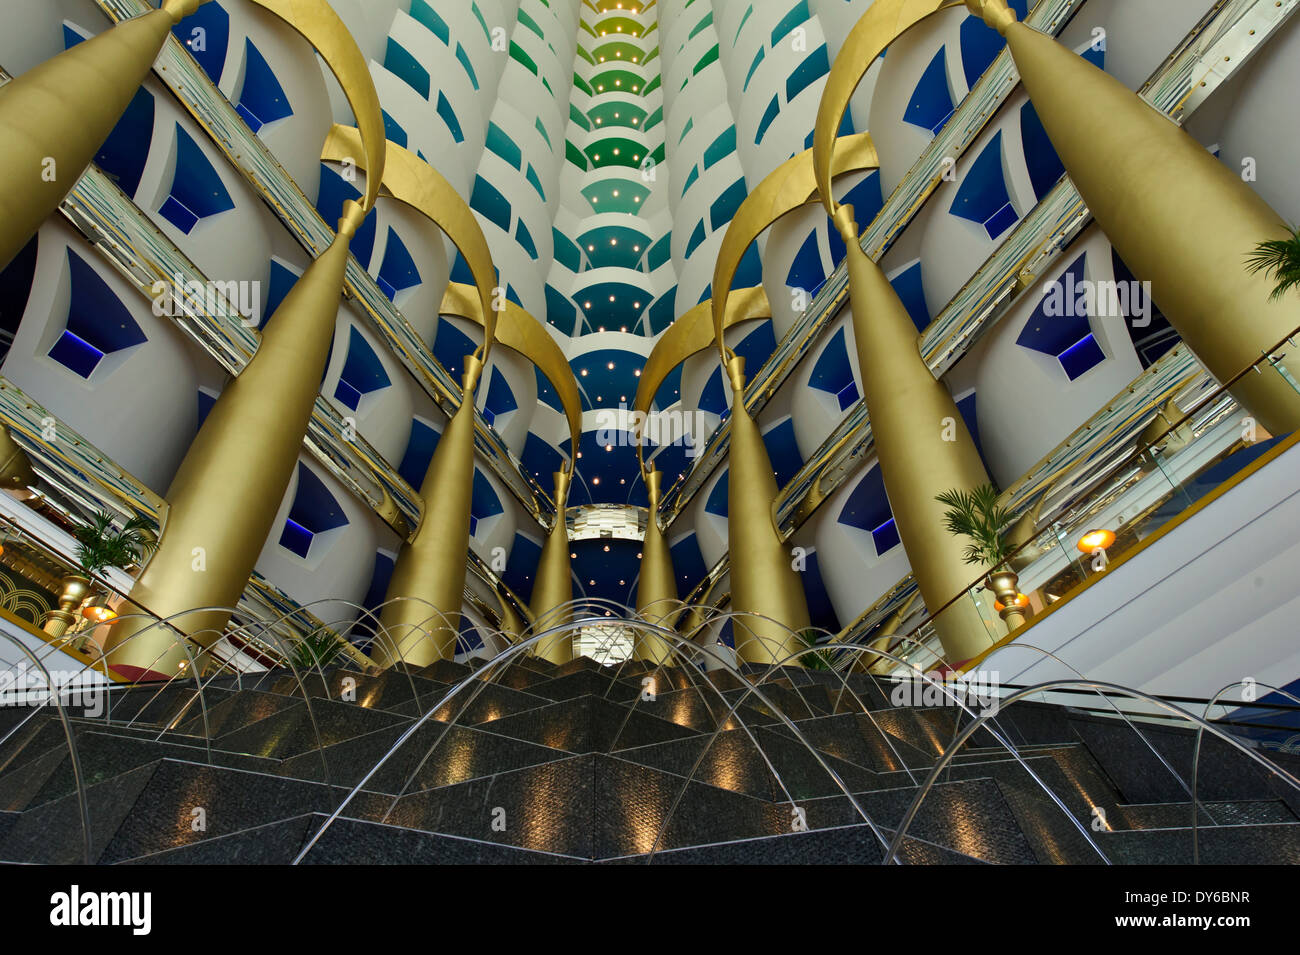 The cross dancing jets of water at the water fountain in the lobby at he Burj Al Arab Hotel, Dubai, United Arab Emirates, UAE. Stock Photo